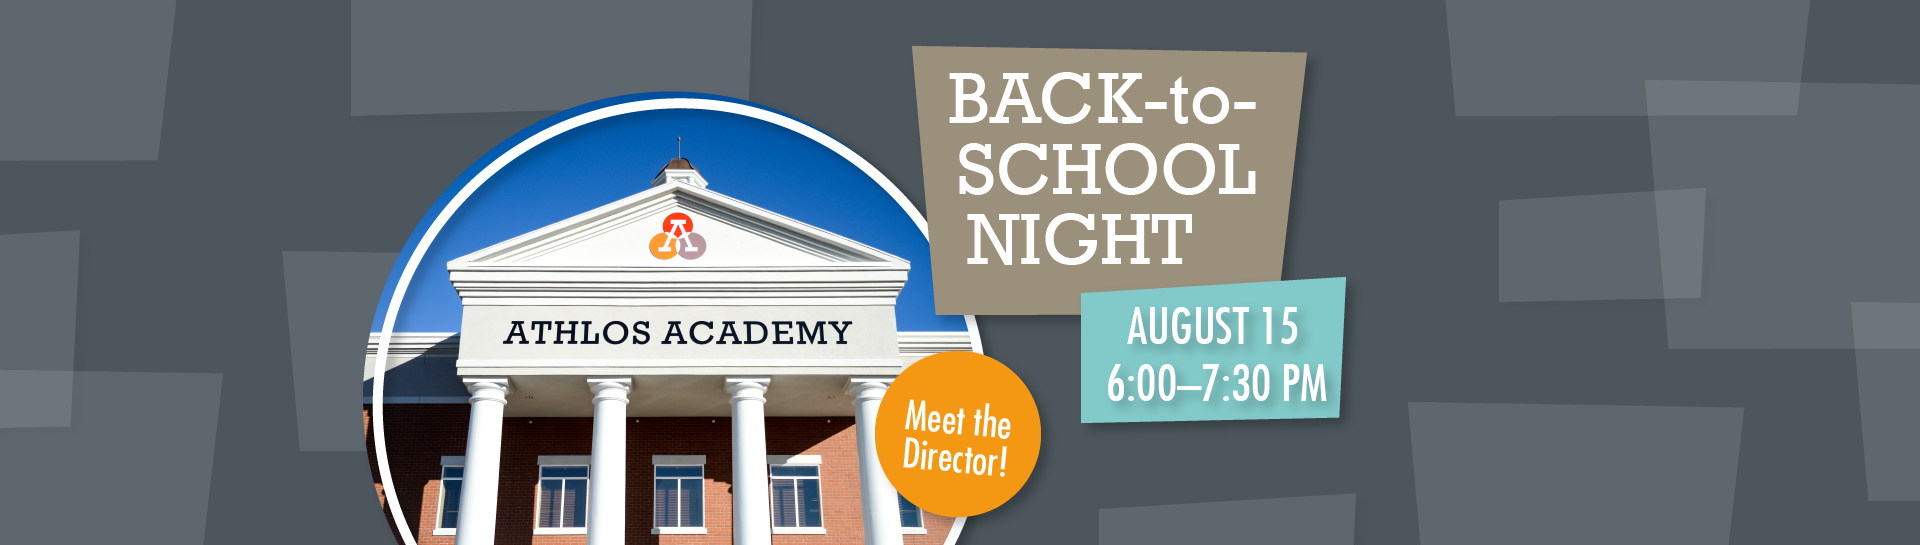 Back to School Night - August 15